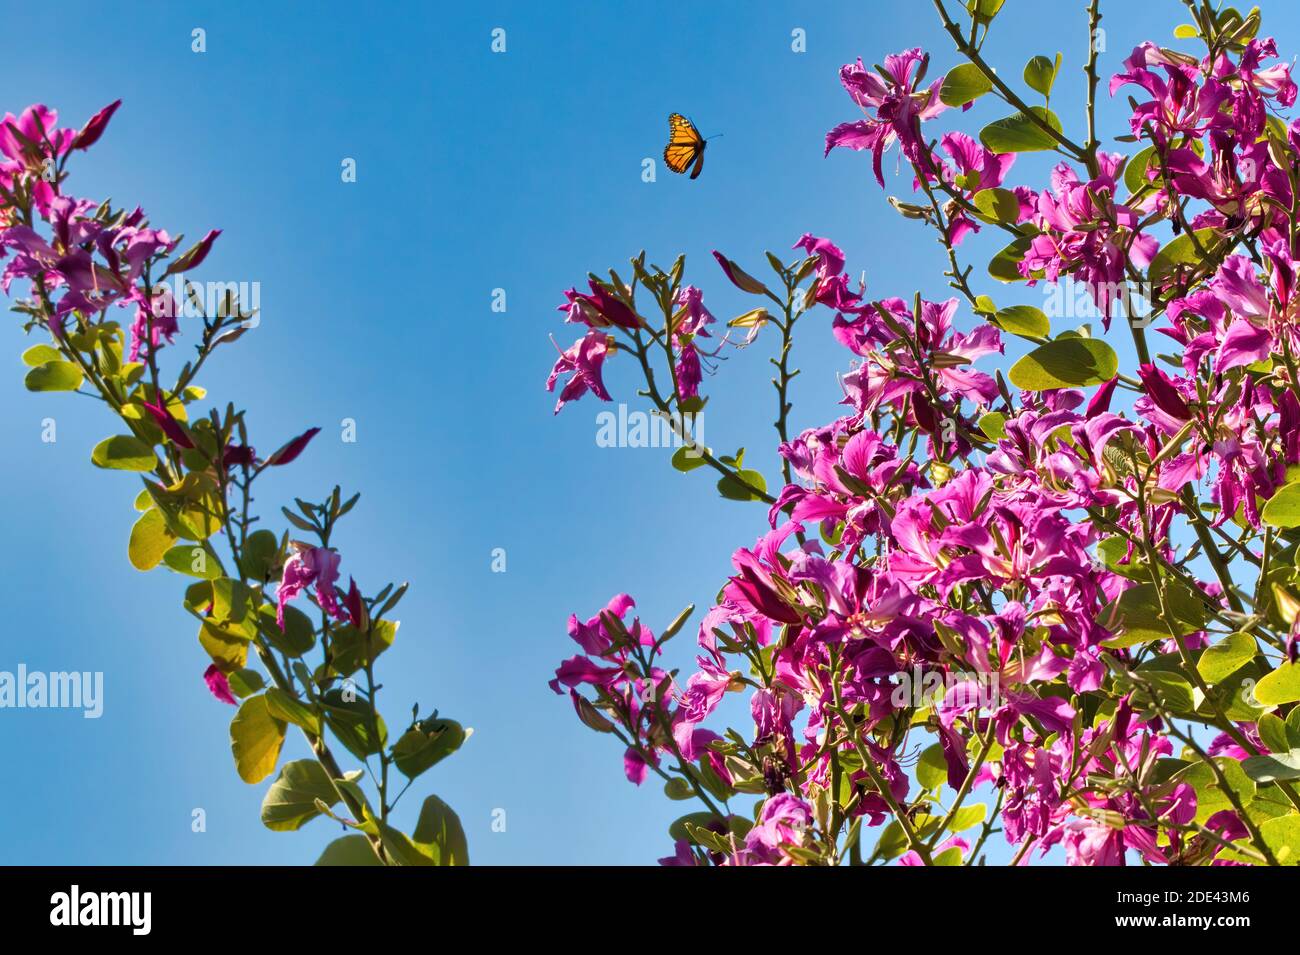 Monarch butterfly flying over a bunch of purlpe flowers on a tree with a bright blue sky beyond. Stock Photo